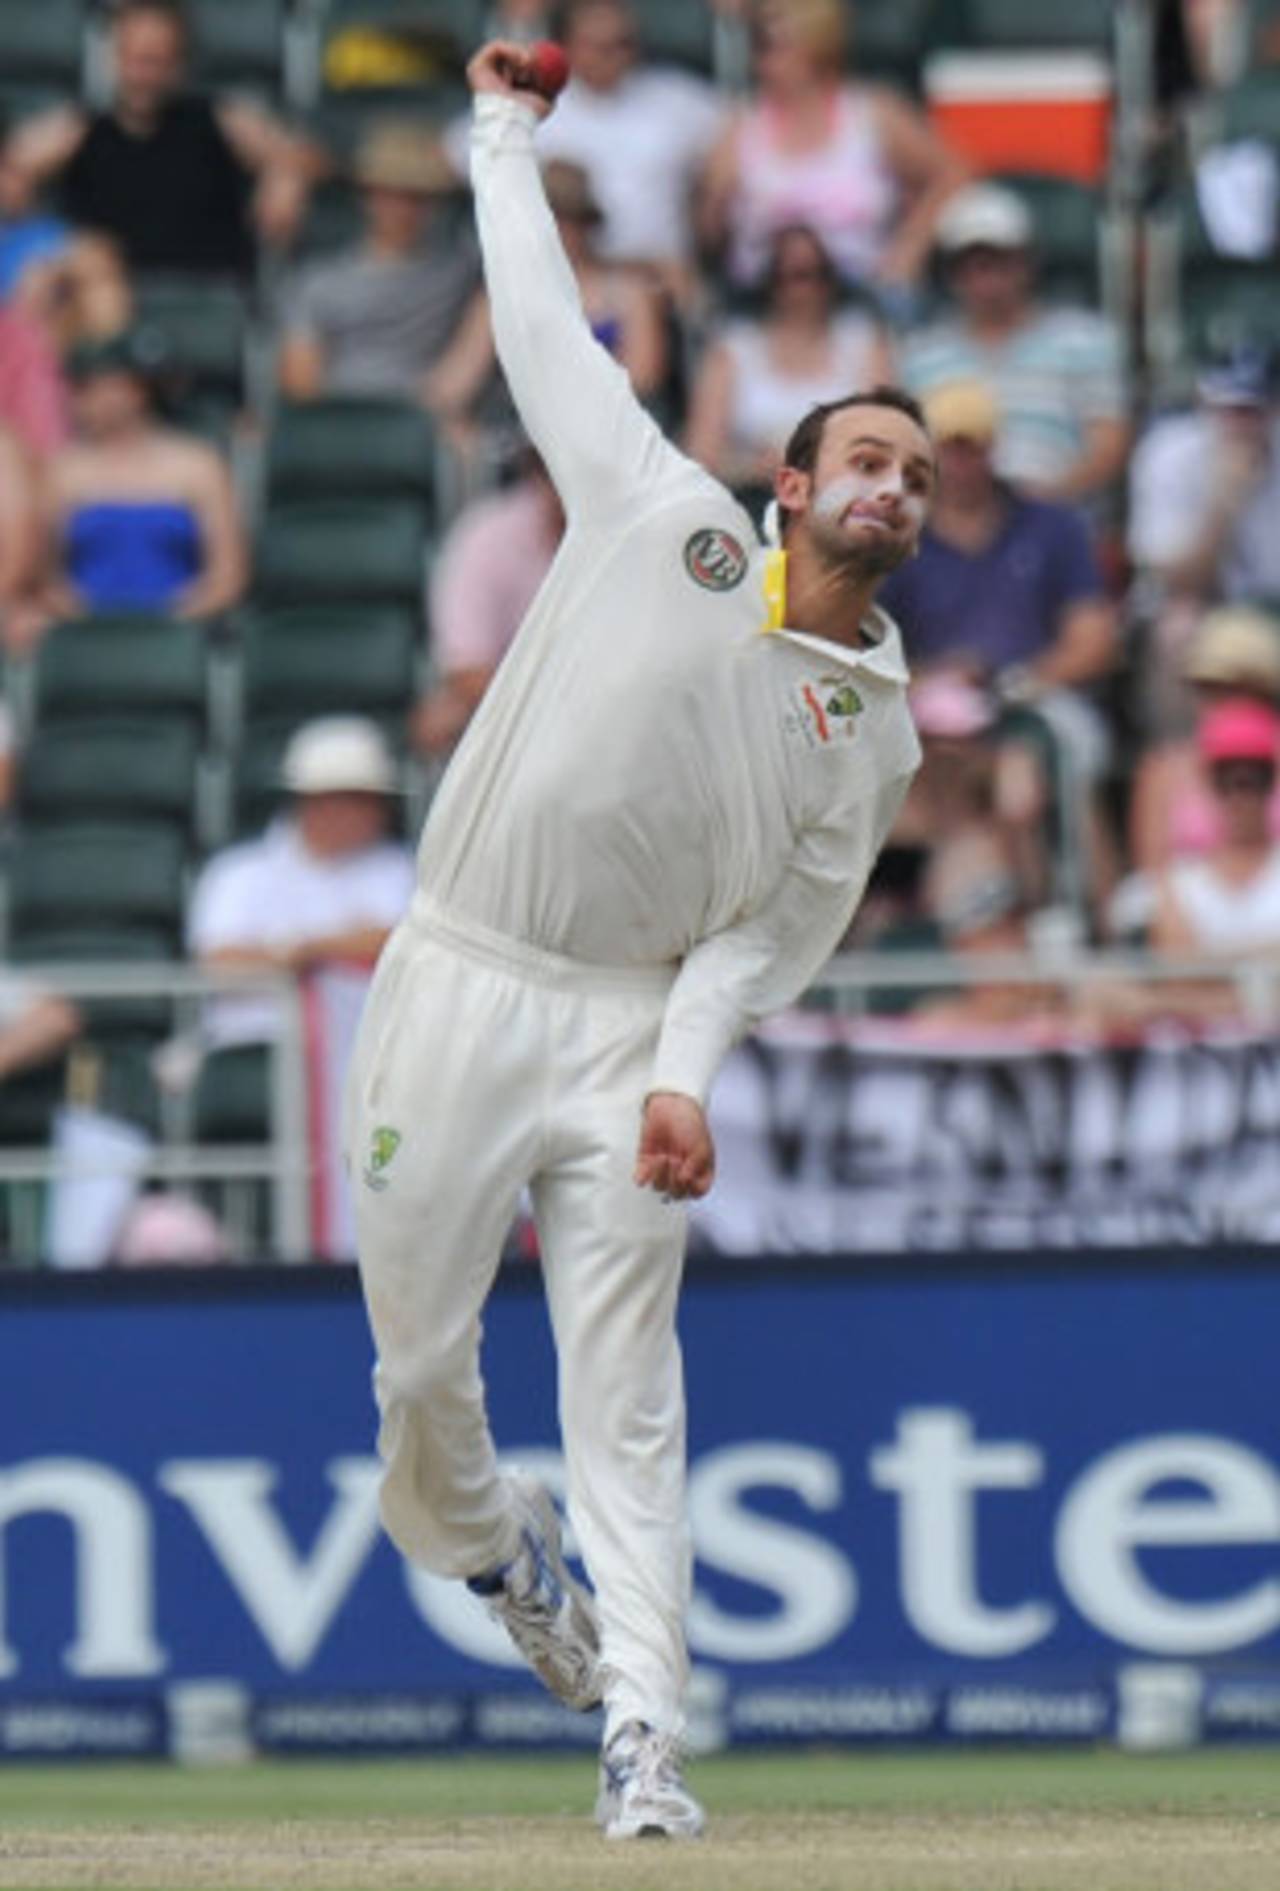 Nathan Lyon's natural gifts of height and flexibility allow for the teasing drop and considerable torque gained from an easy, repeatable bowling action&nbsp;&nbsp;&bull;&nbsp;&nbsp;AFP